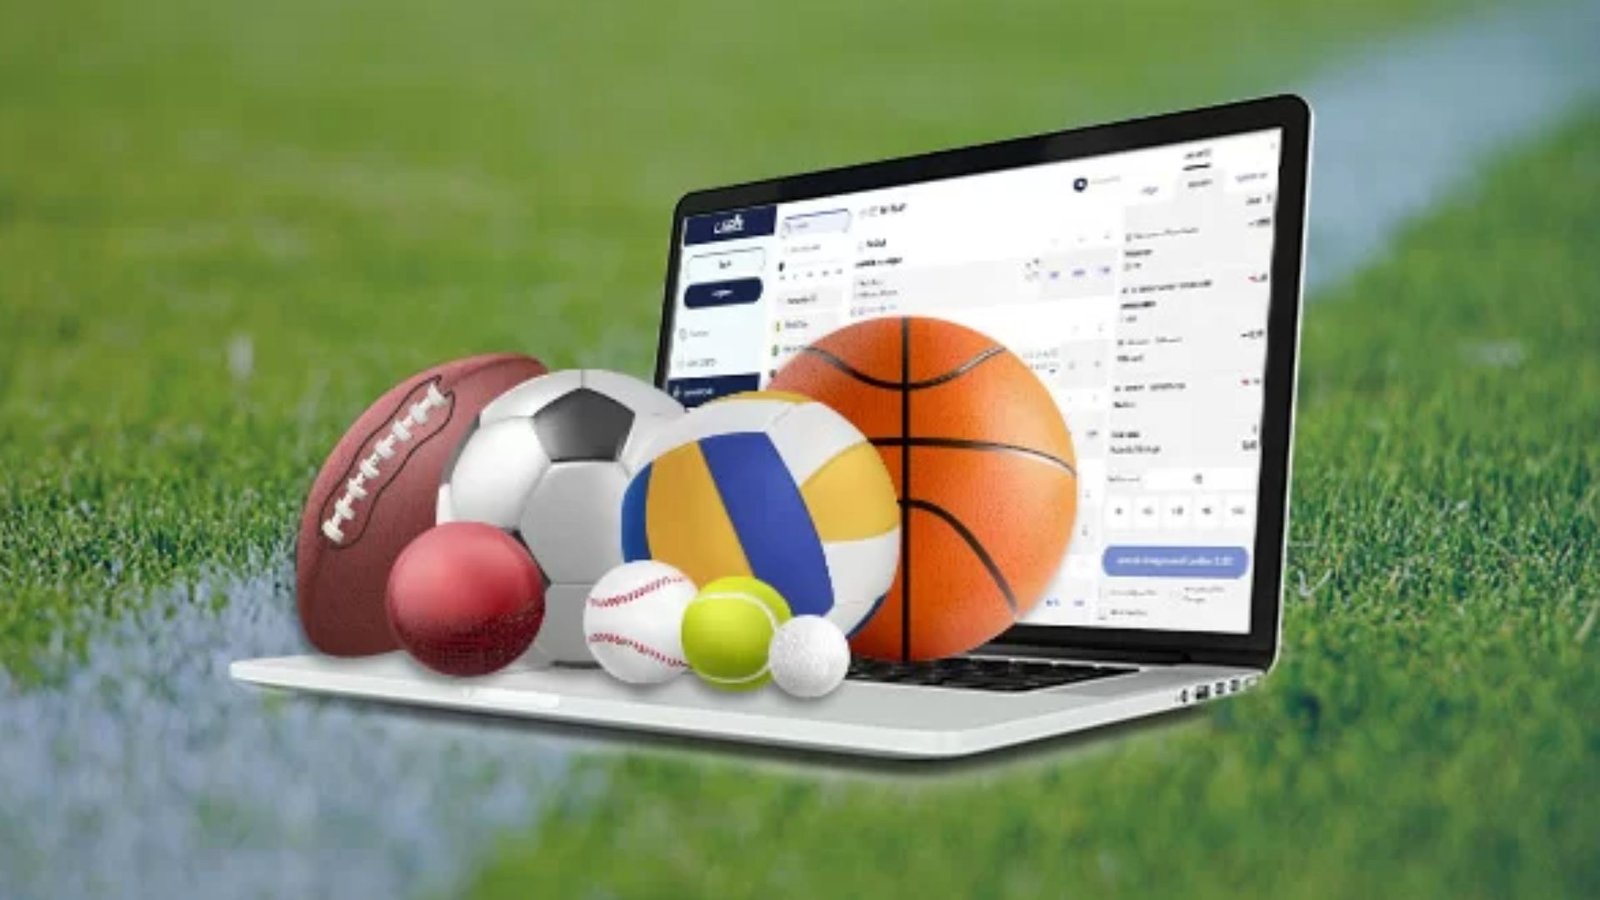 Different Balls for Different Sports on top of A Laptop